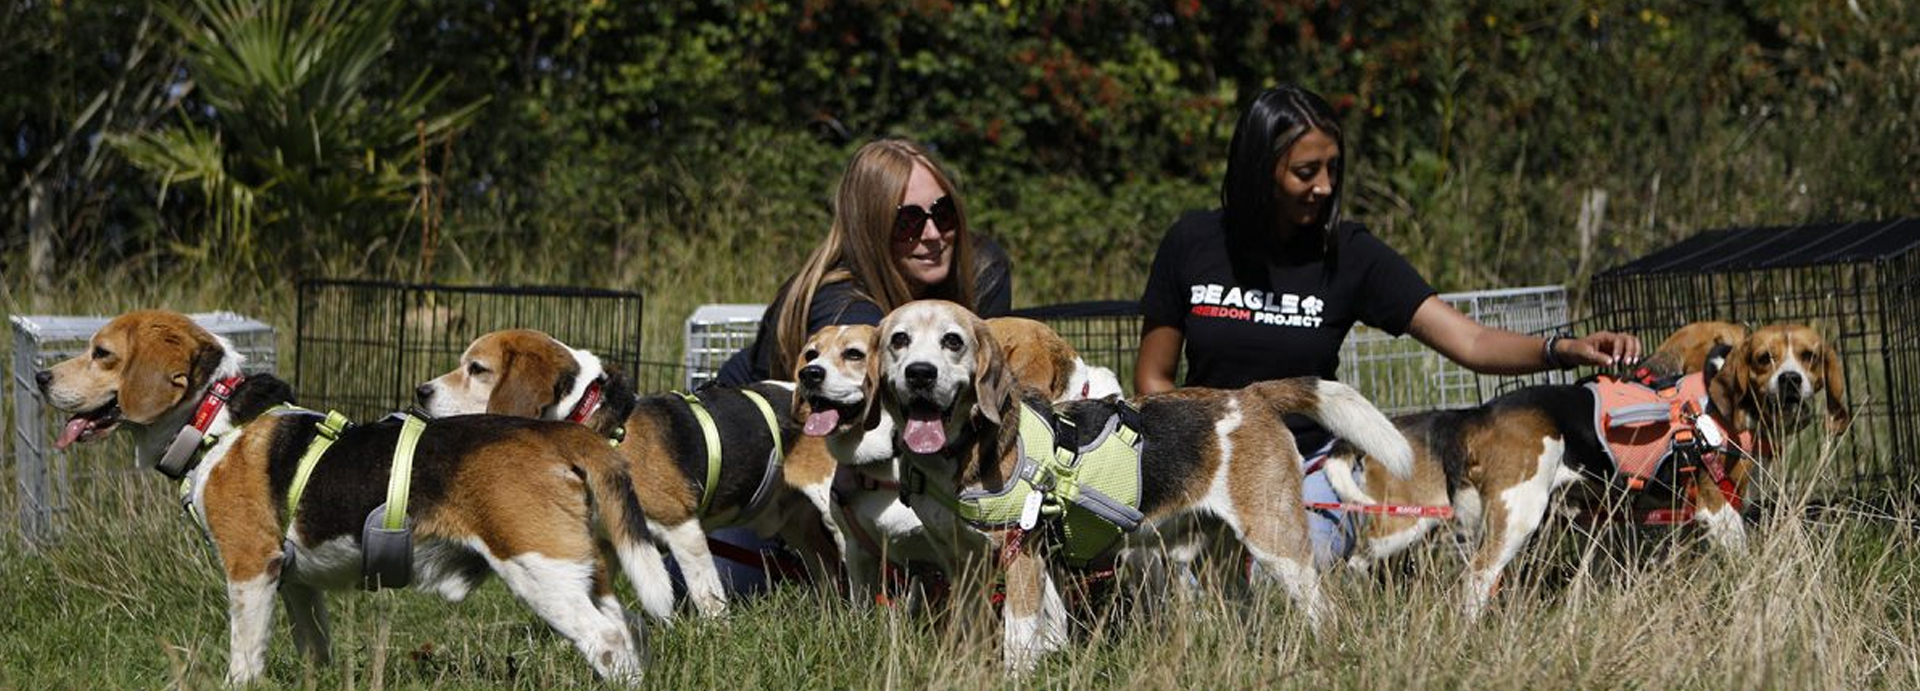 Seven beagles freed from an animal testing lab experience freedom for the first time